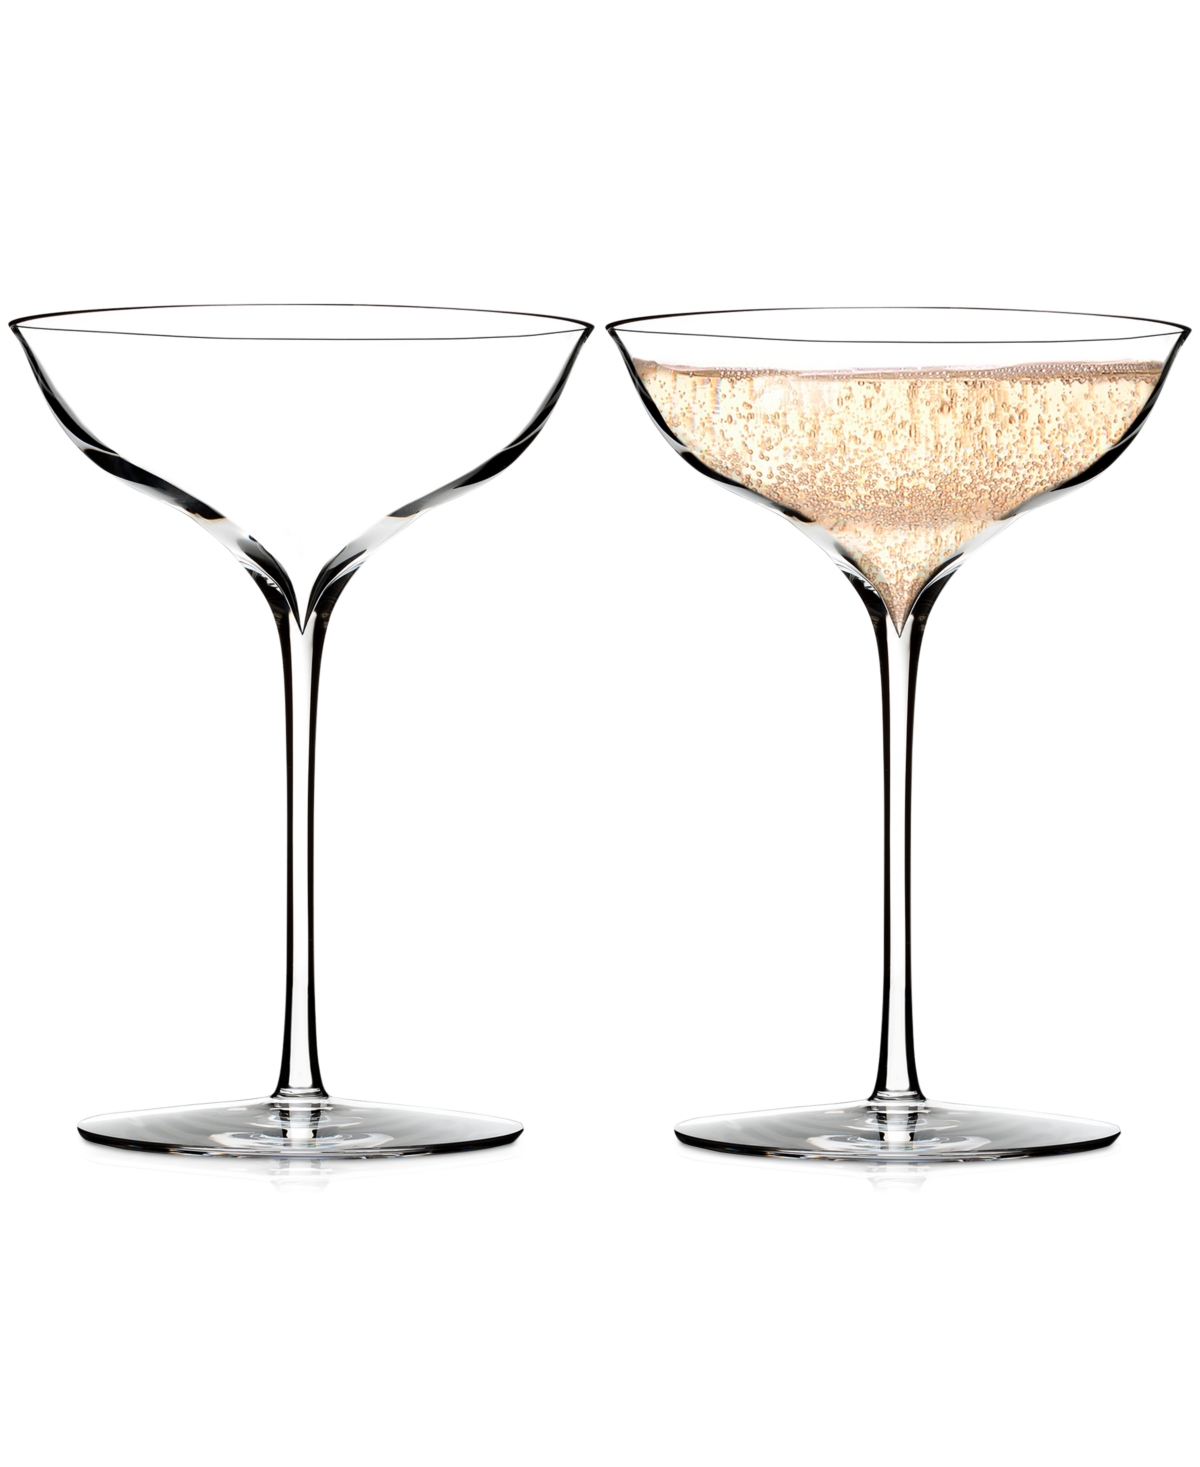 Waterford Elegance Champagne Belle Coupe Glass, Pair In No Color